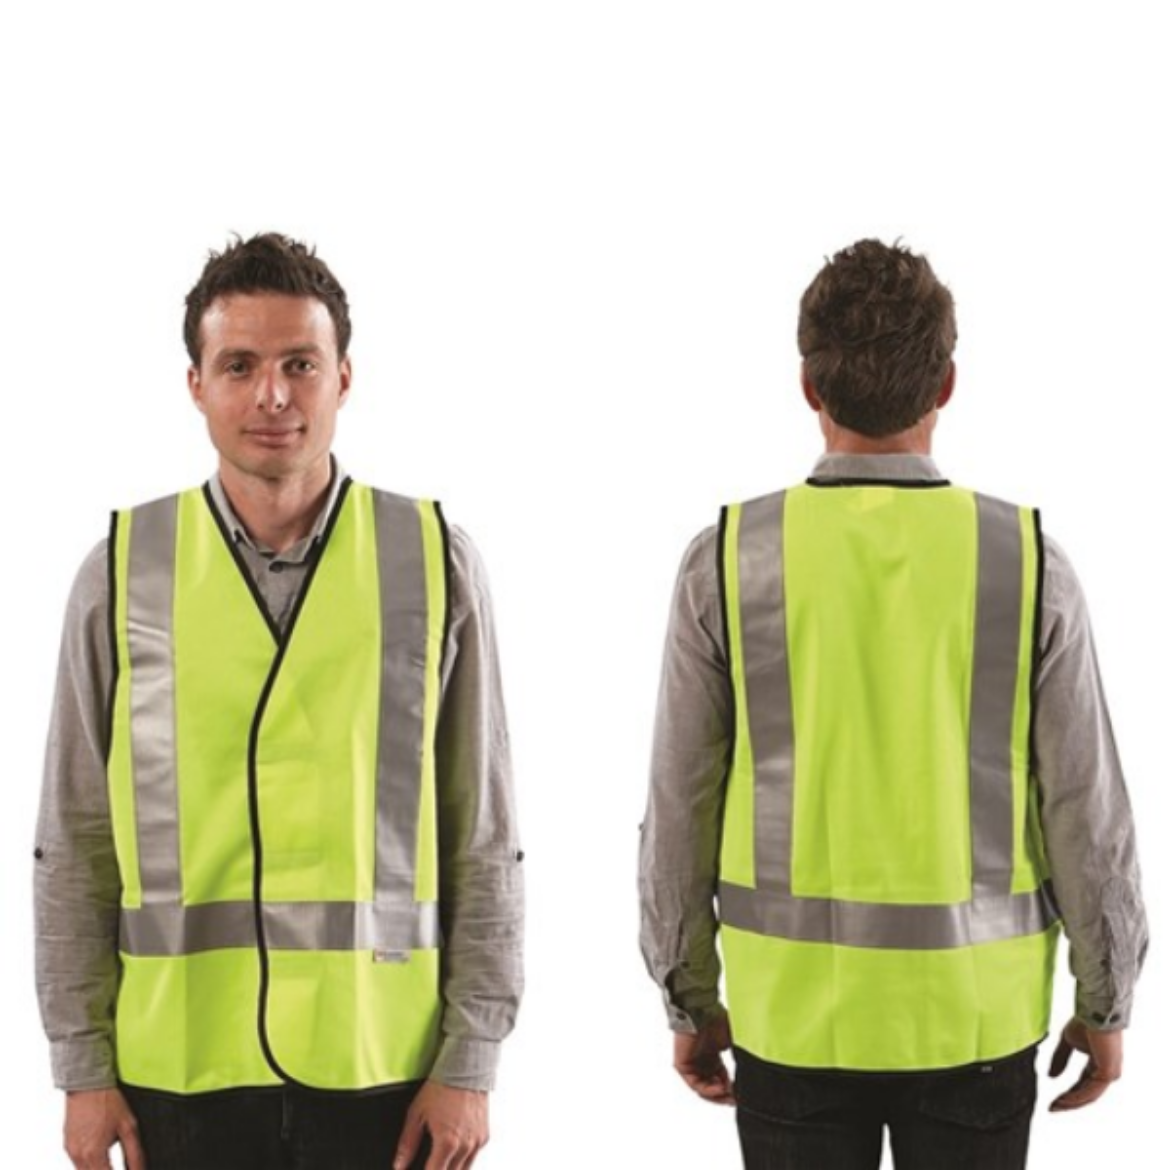 Picture of YELLOW VEST DAY/NIGHT USE WITH H BACK PATTERN REFLECTIVE TAPE. AVAILABLE IN SIZES S/M/L/XL/2XL/3XL/4XL